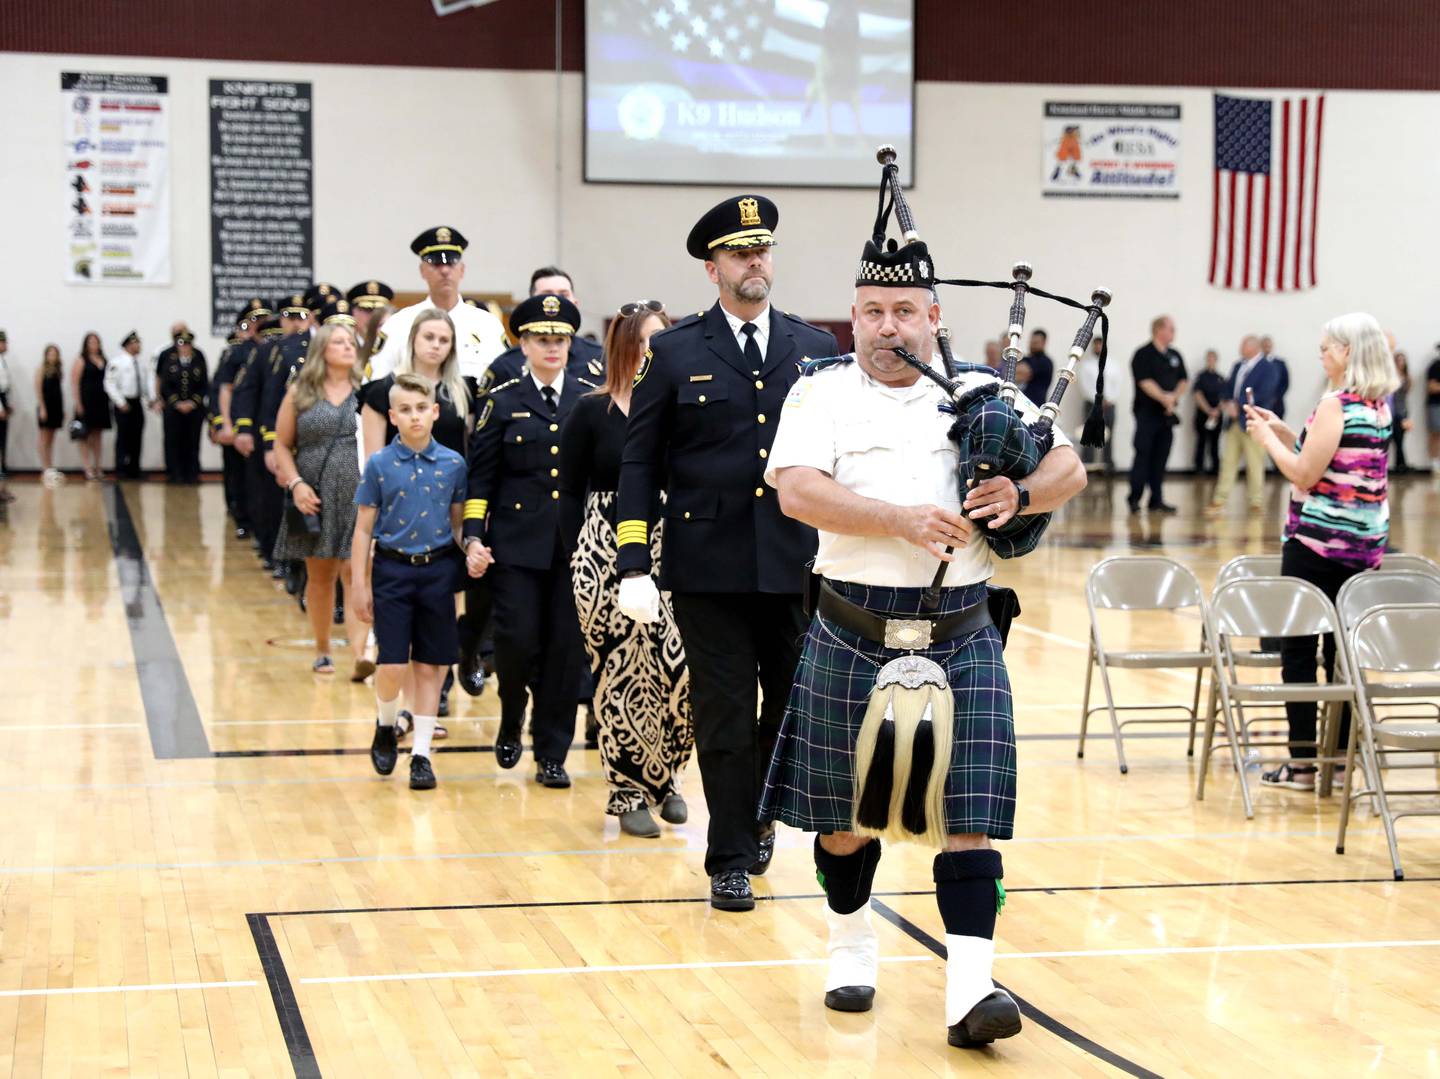 Kane County Sheriff Ron Hain (second from right) and Kane County Sheriff personnel are led by a bagpiper during a funeral in honor of Kane County Sheriff K9 Hudson, who lost his life in the line of duty last month, on Thursday, June 1, 2023 at Kaneland Harter Middle School in Sugar Grove.